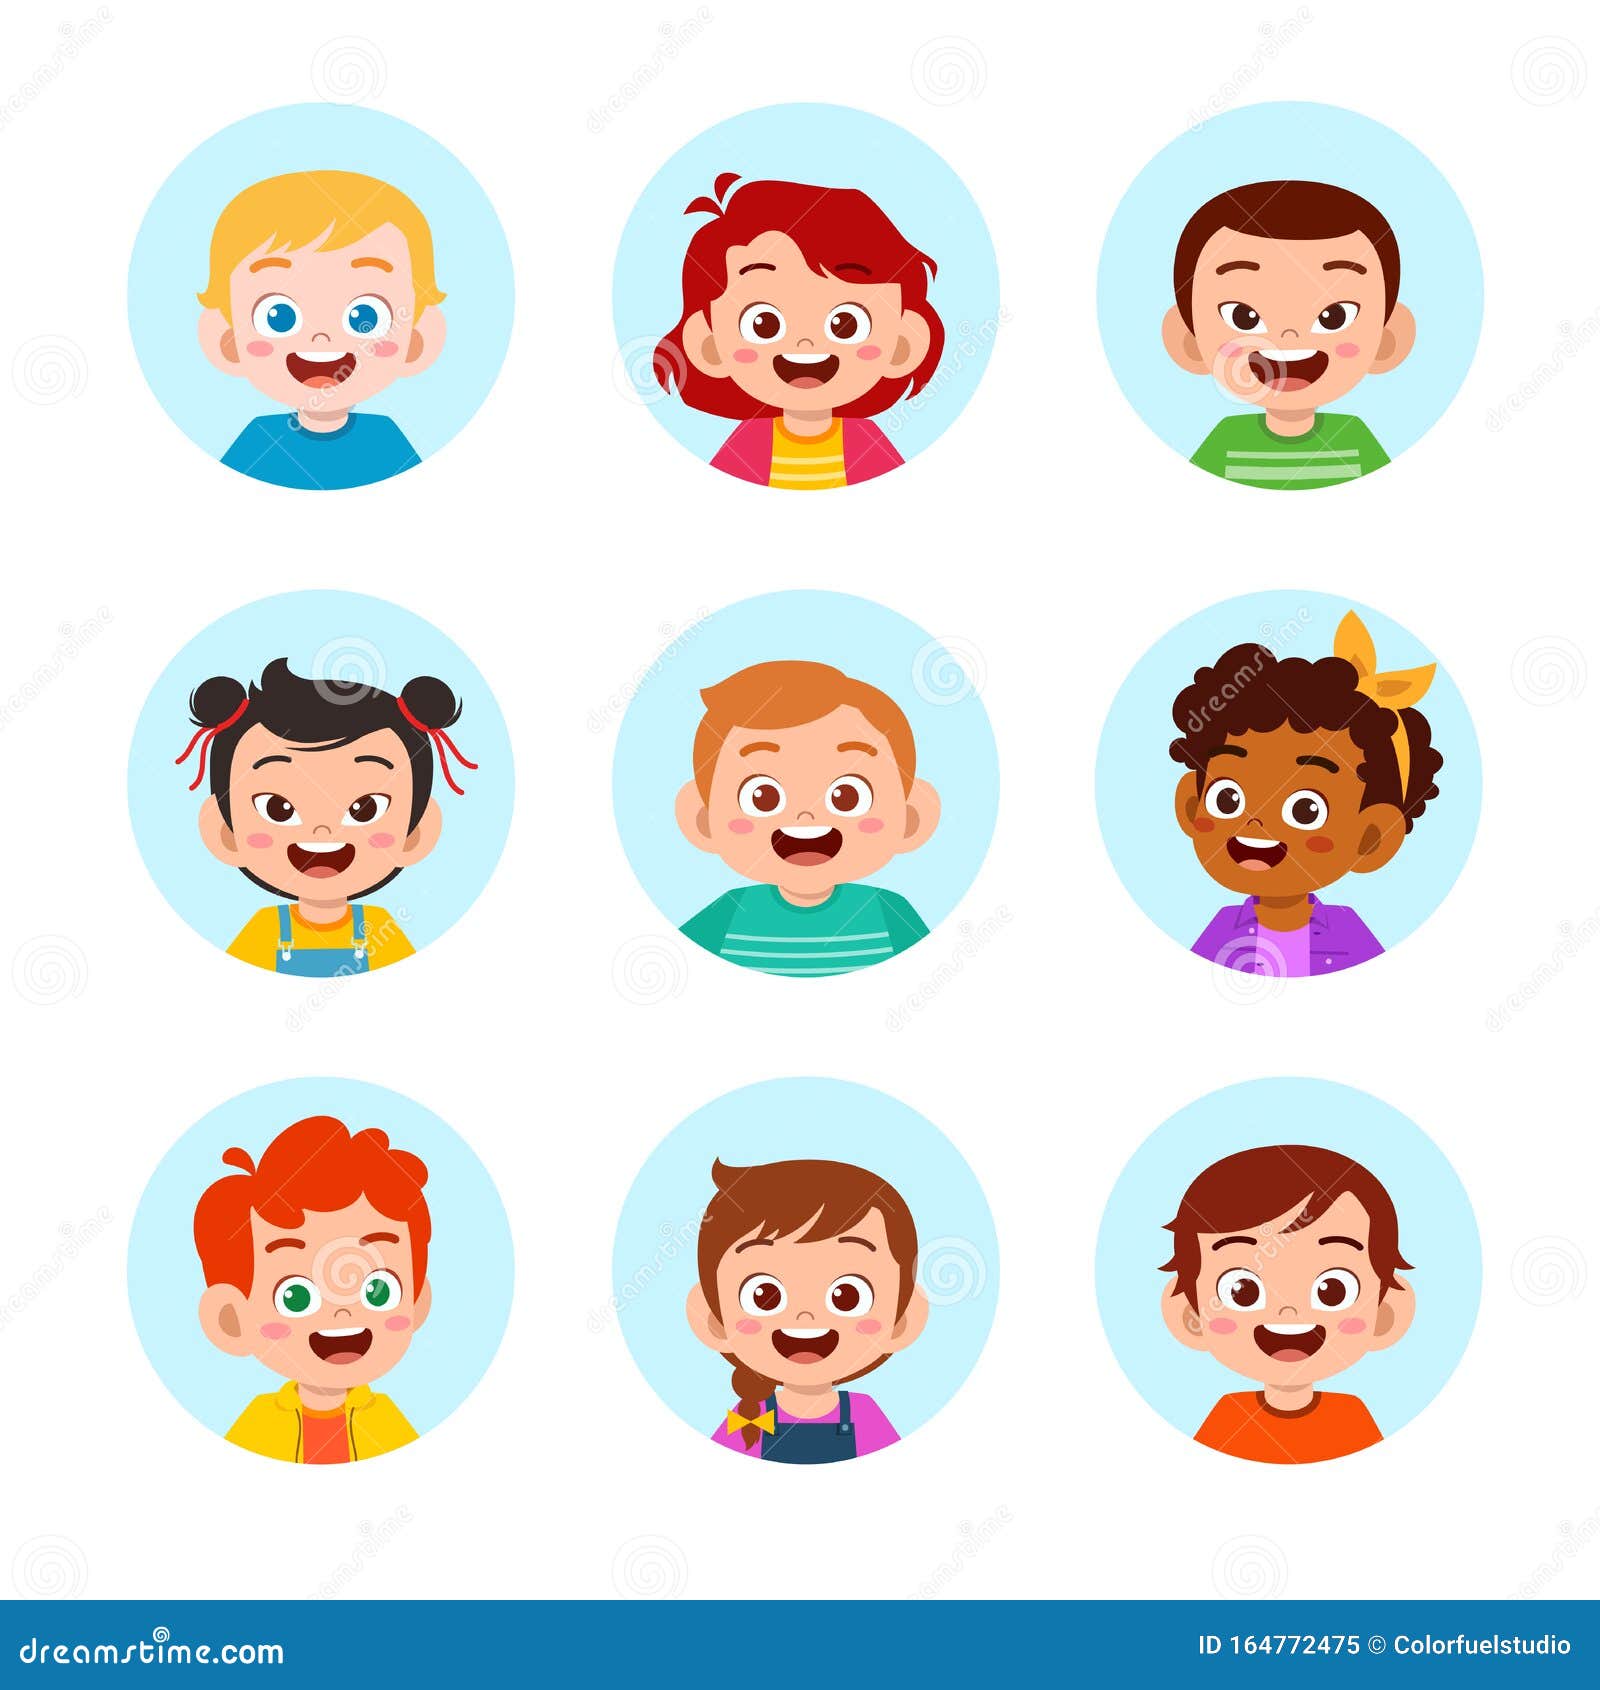 Young Boy Kid Avatar Facial Expressions Set of Cute Emoticon Heads Stock  Vector  Illustration of characters collection 76216985